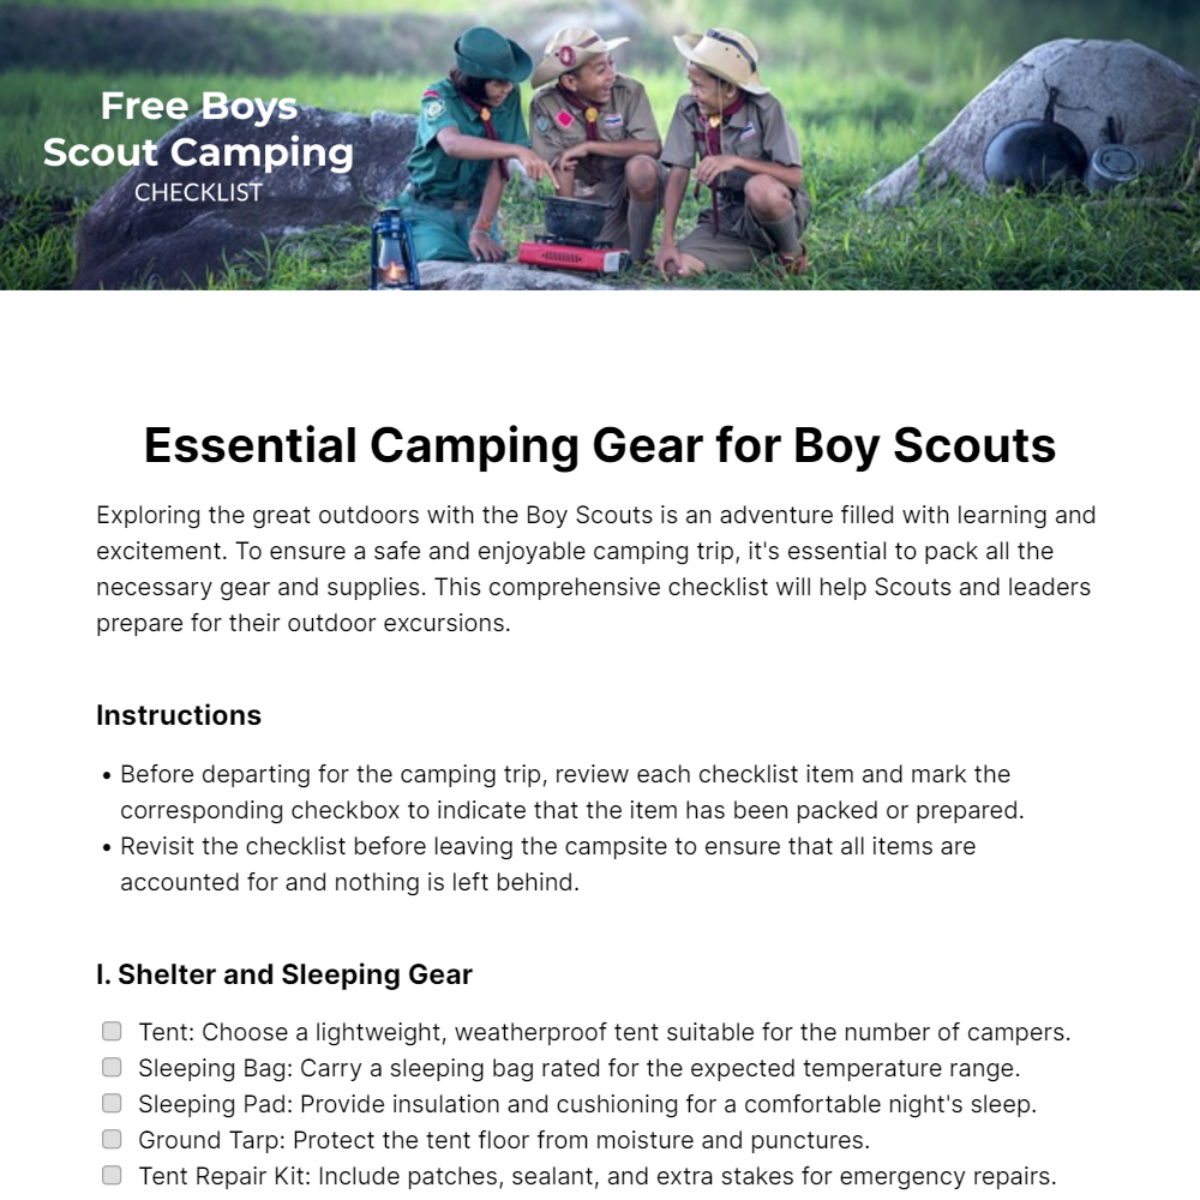 Boys Scout Camping Checklist Template